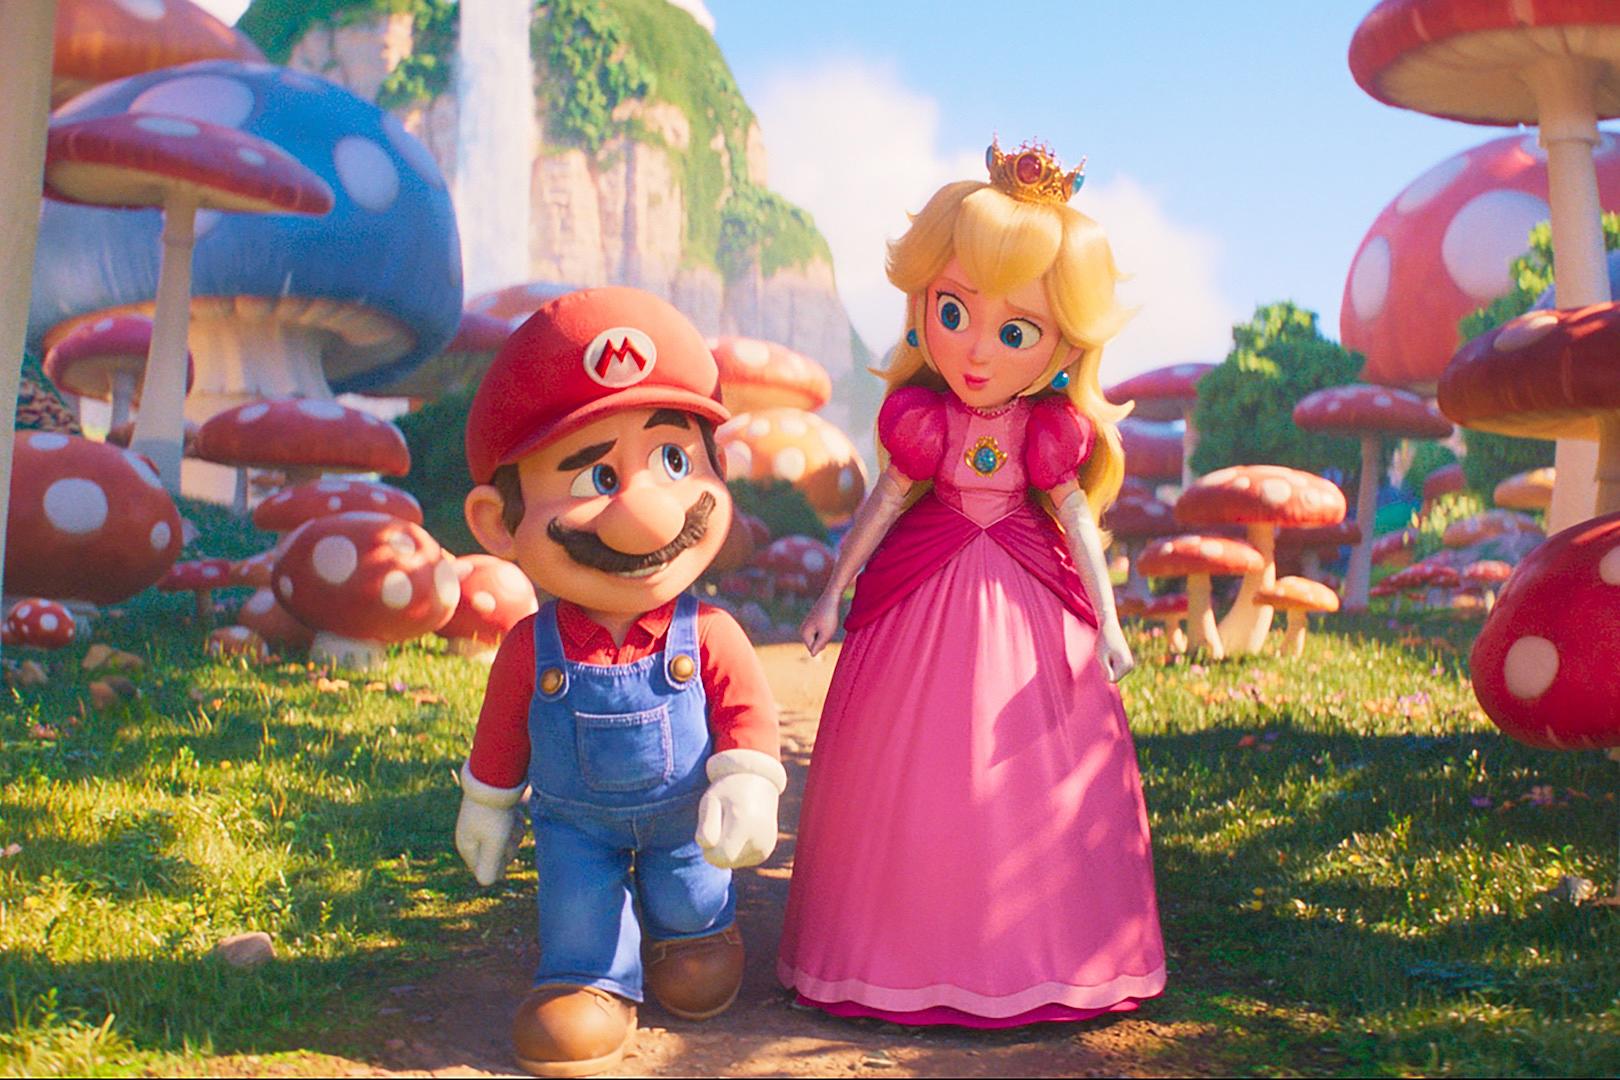 Super Mario: 25 Wild Revelations About Mario And Peach's Relationship Fans  Didn't Realize